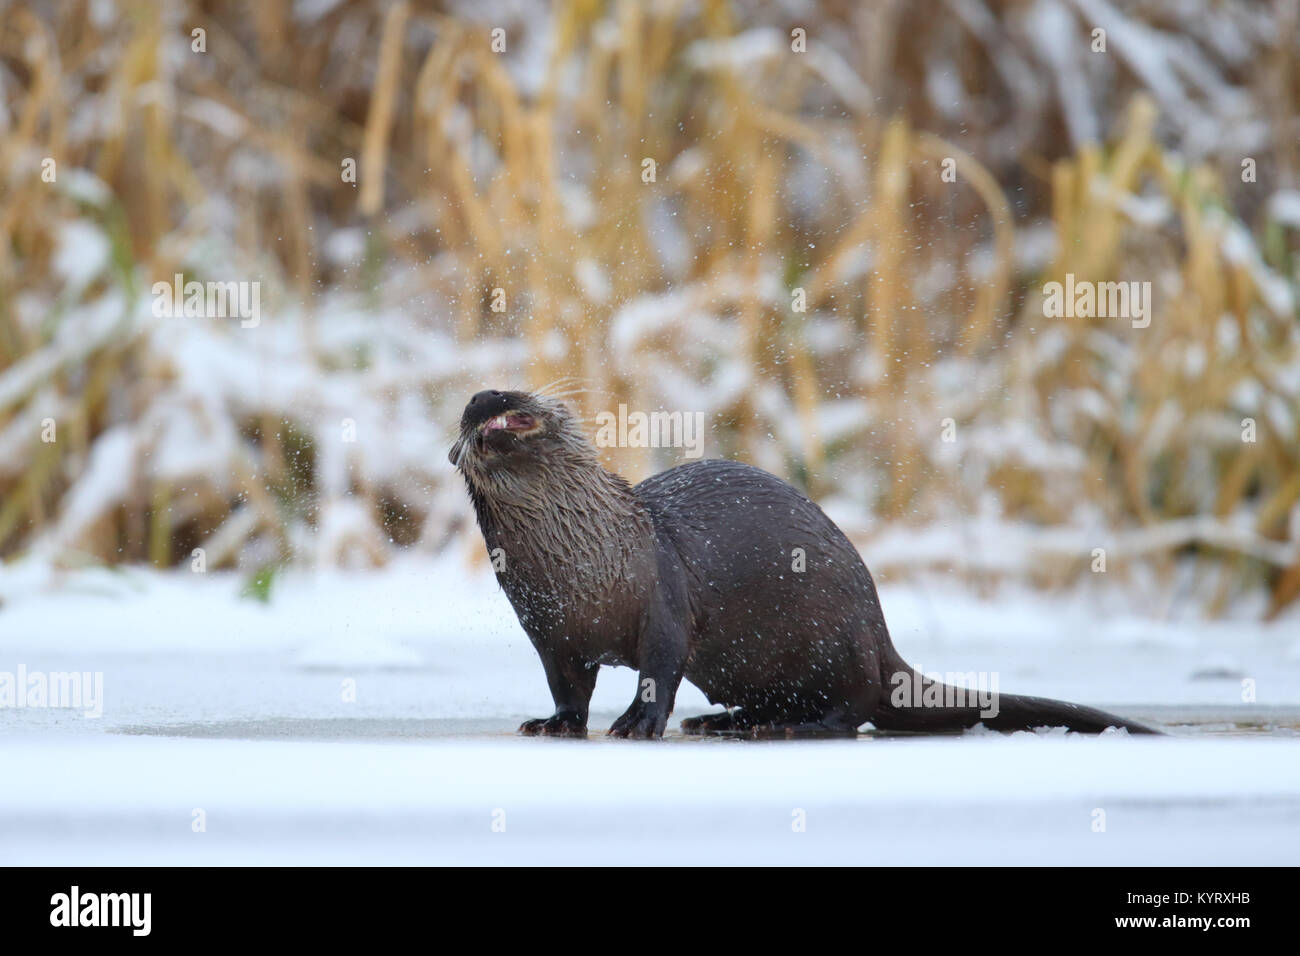 Wild loutre d'Europe (Lutra lutra) secouant sa fourrure, Europe Banque D'Images